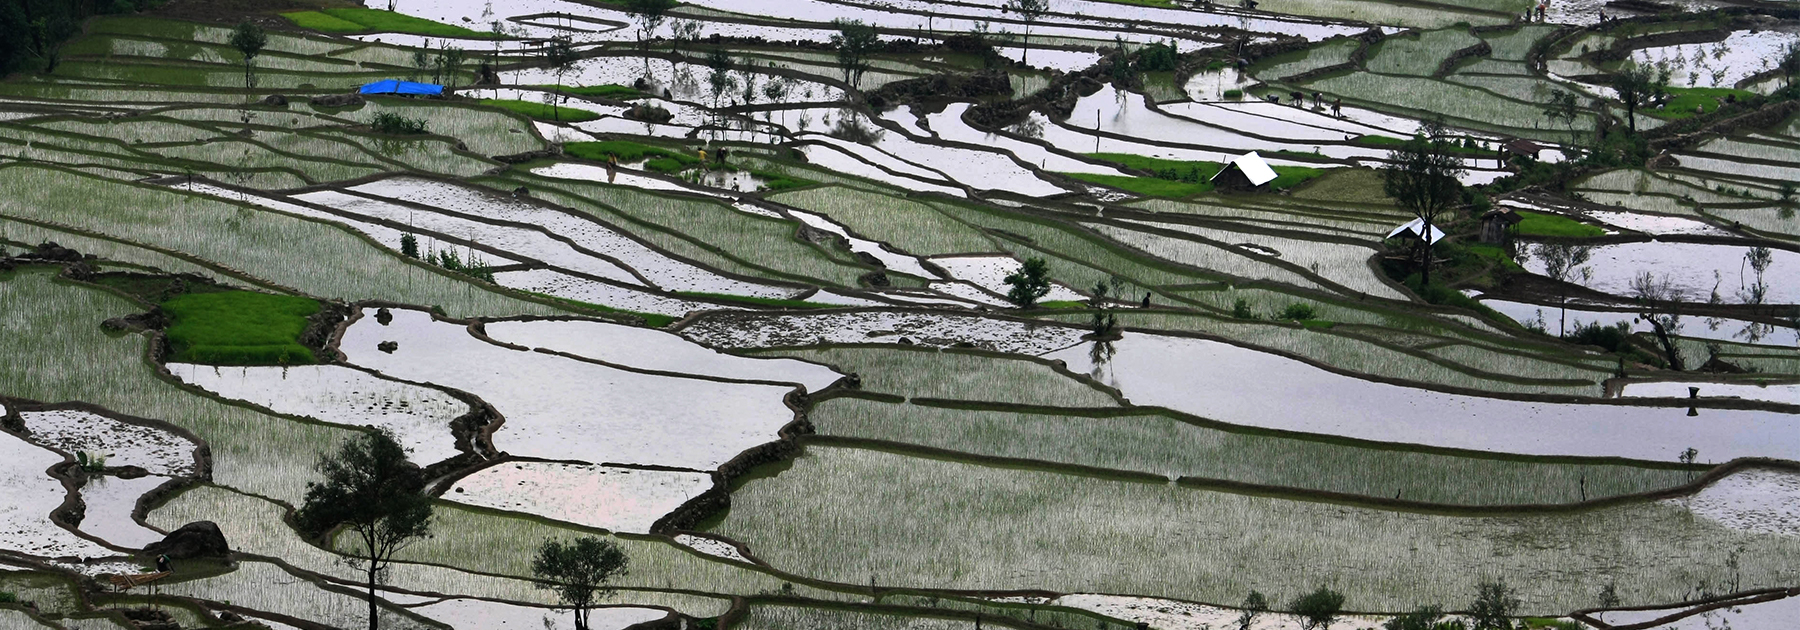 Tribal Naga farmers work in their water bedded rice paddy fields on the arrival of the monsoon at Kiwema Village. (STR/AFP/Getty Images)